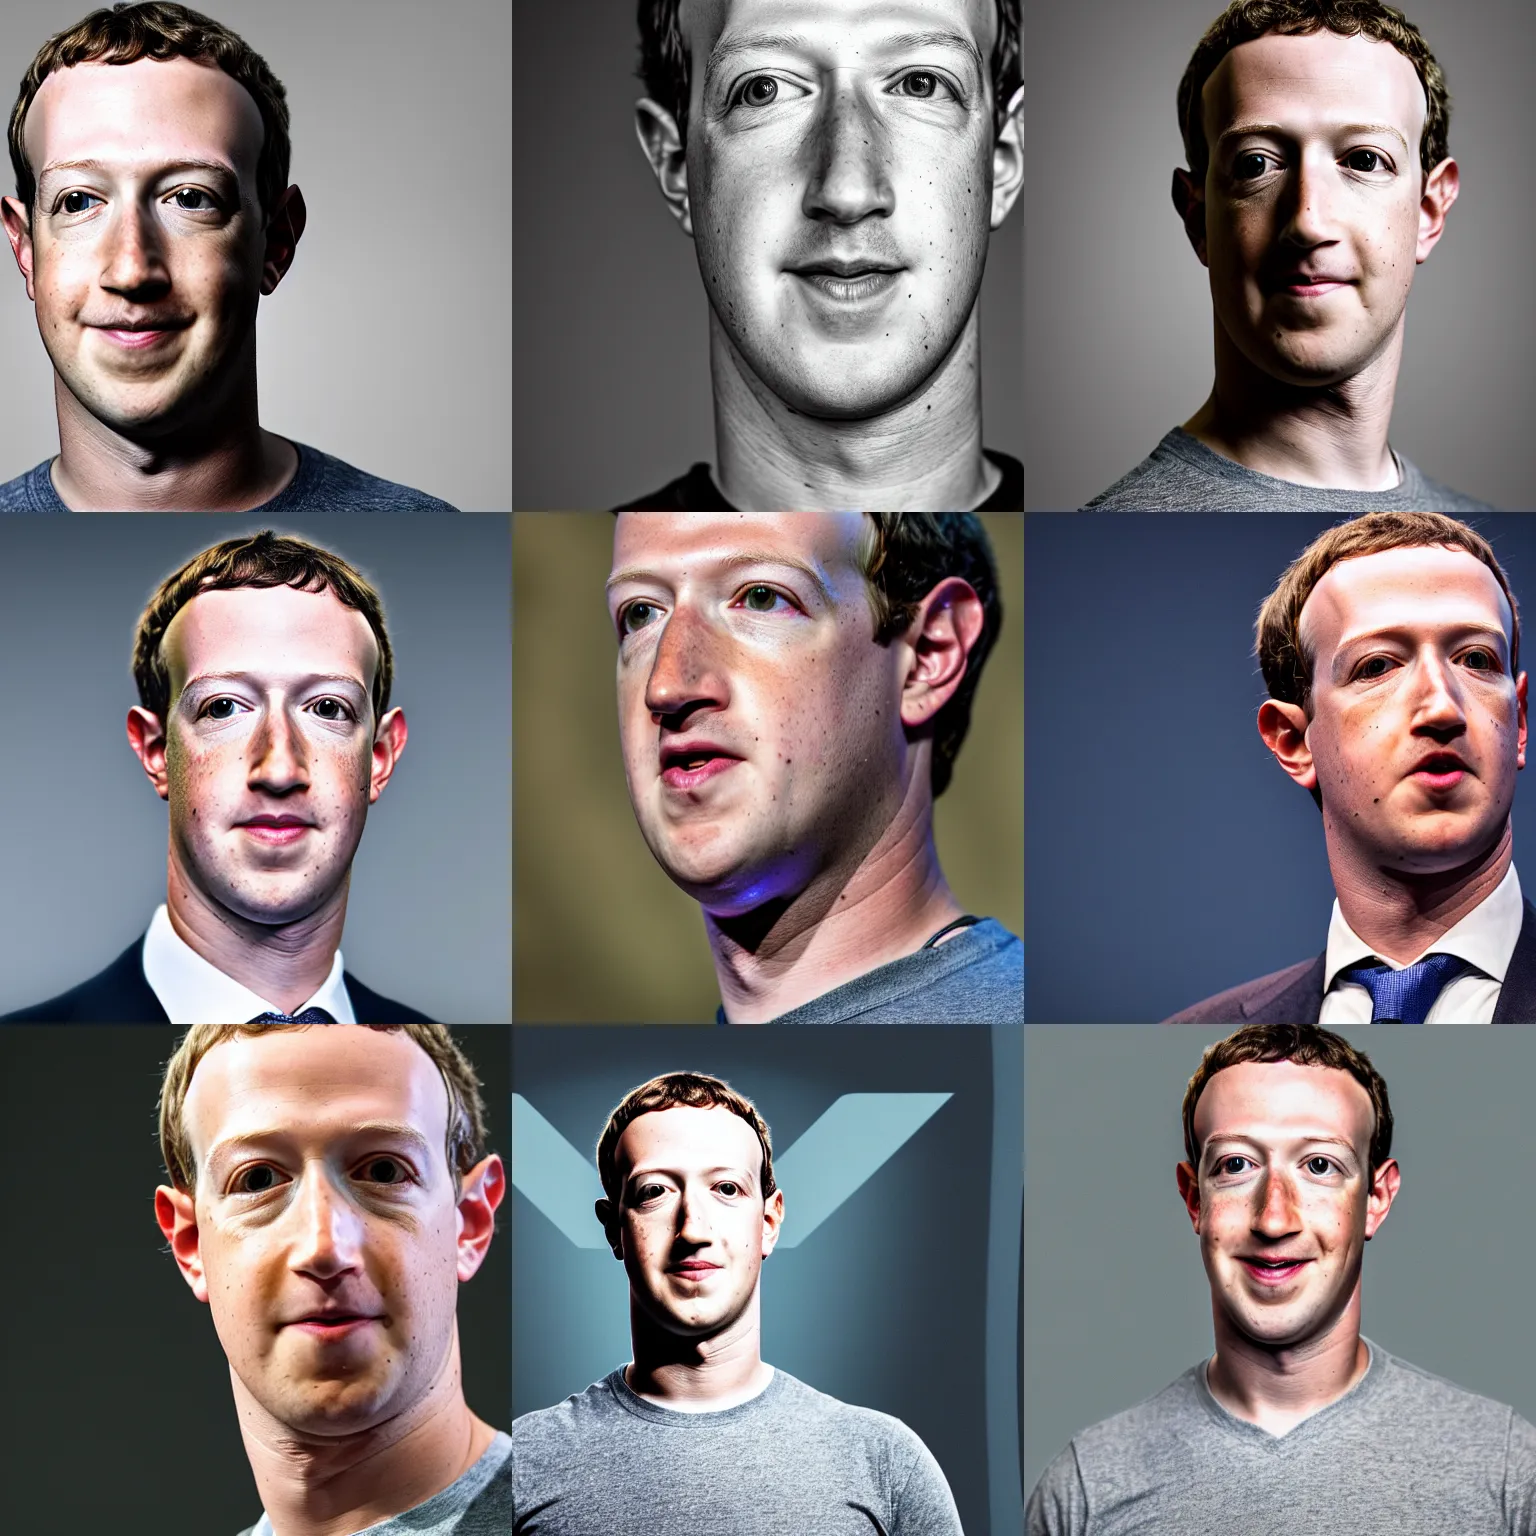 Prompt: headshot of Mark Zuckerberg as the president of the united wearing military gear giving a speech, EOS-1D, f/1.4, ISO 200, 1/160s, 8K, RAW, unedited, symmetrical balance, in-frame, Photoshop, Nvidia, Topaz AI